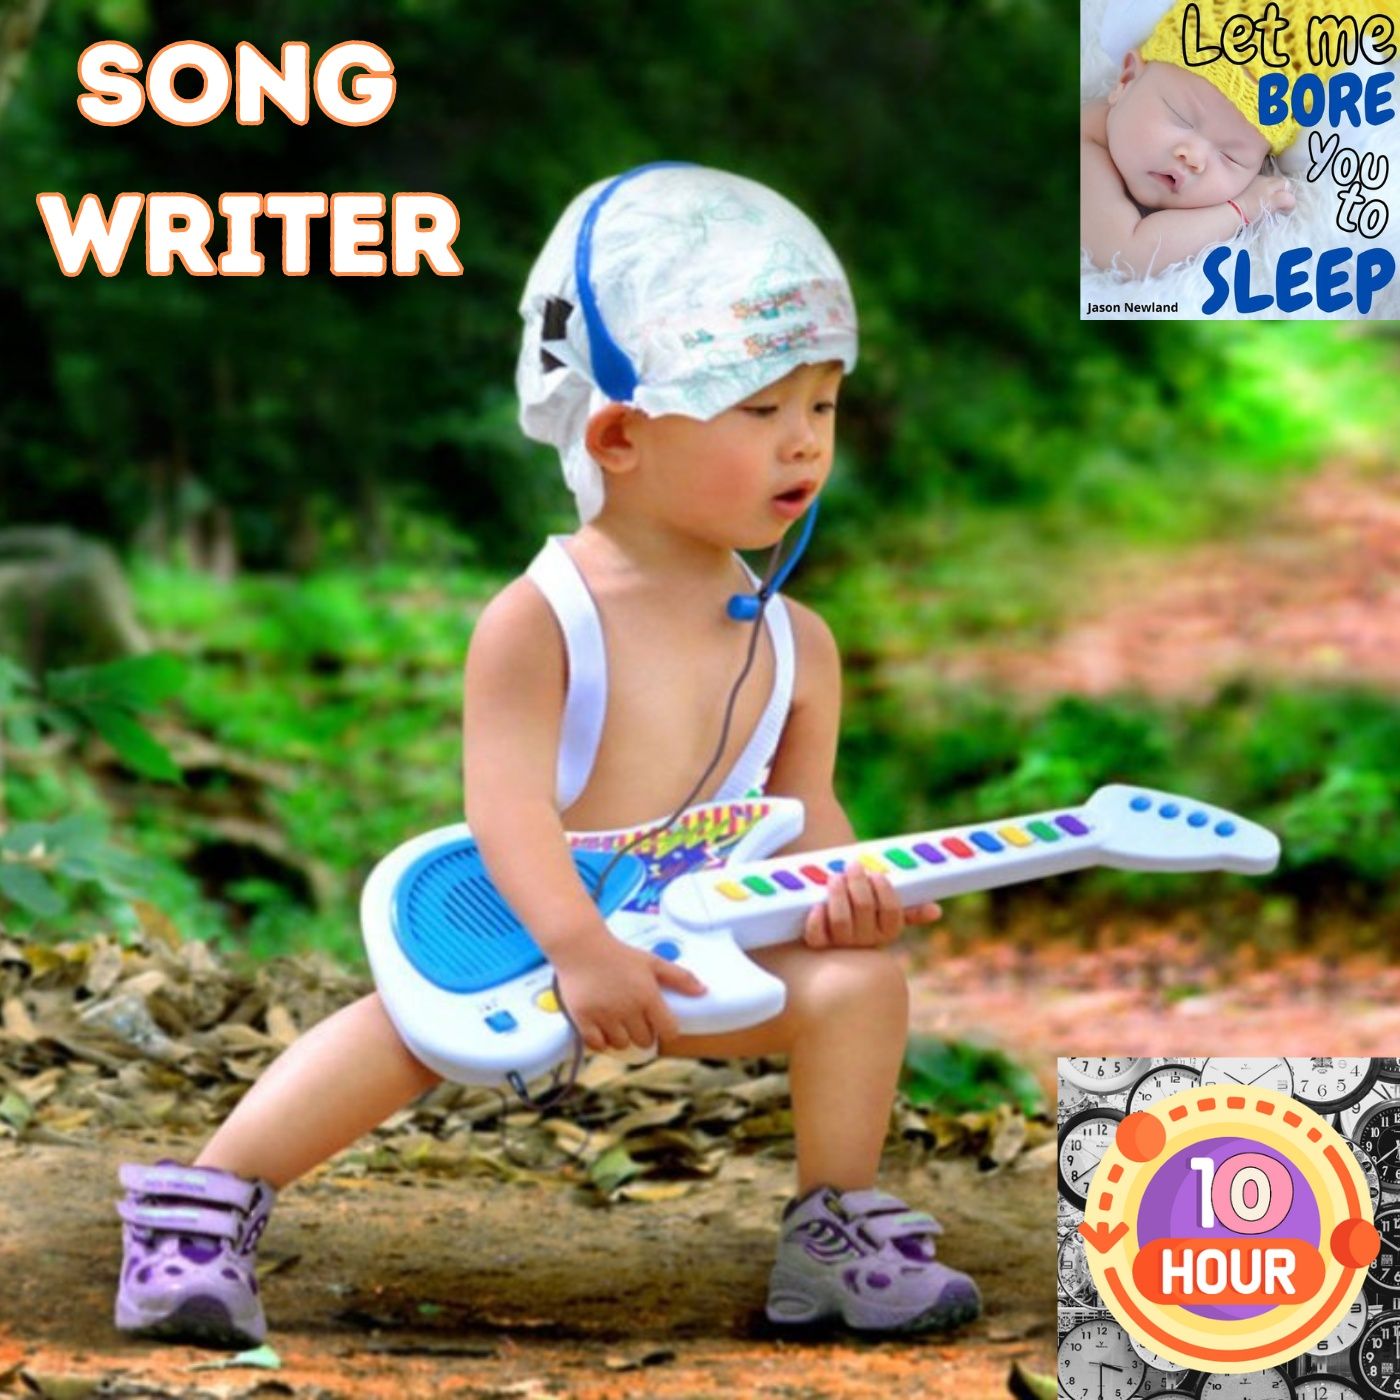 (10 hours) #1048 - Song writer - Let me bore you to sleep